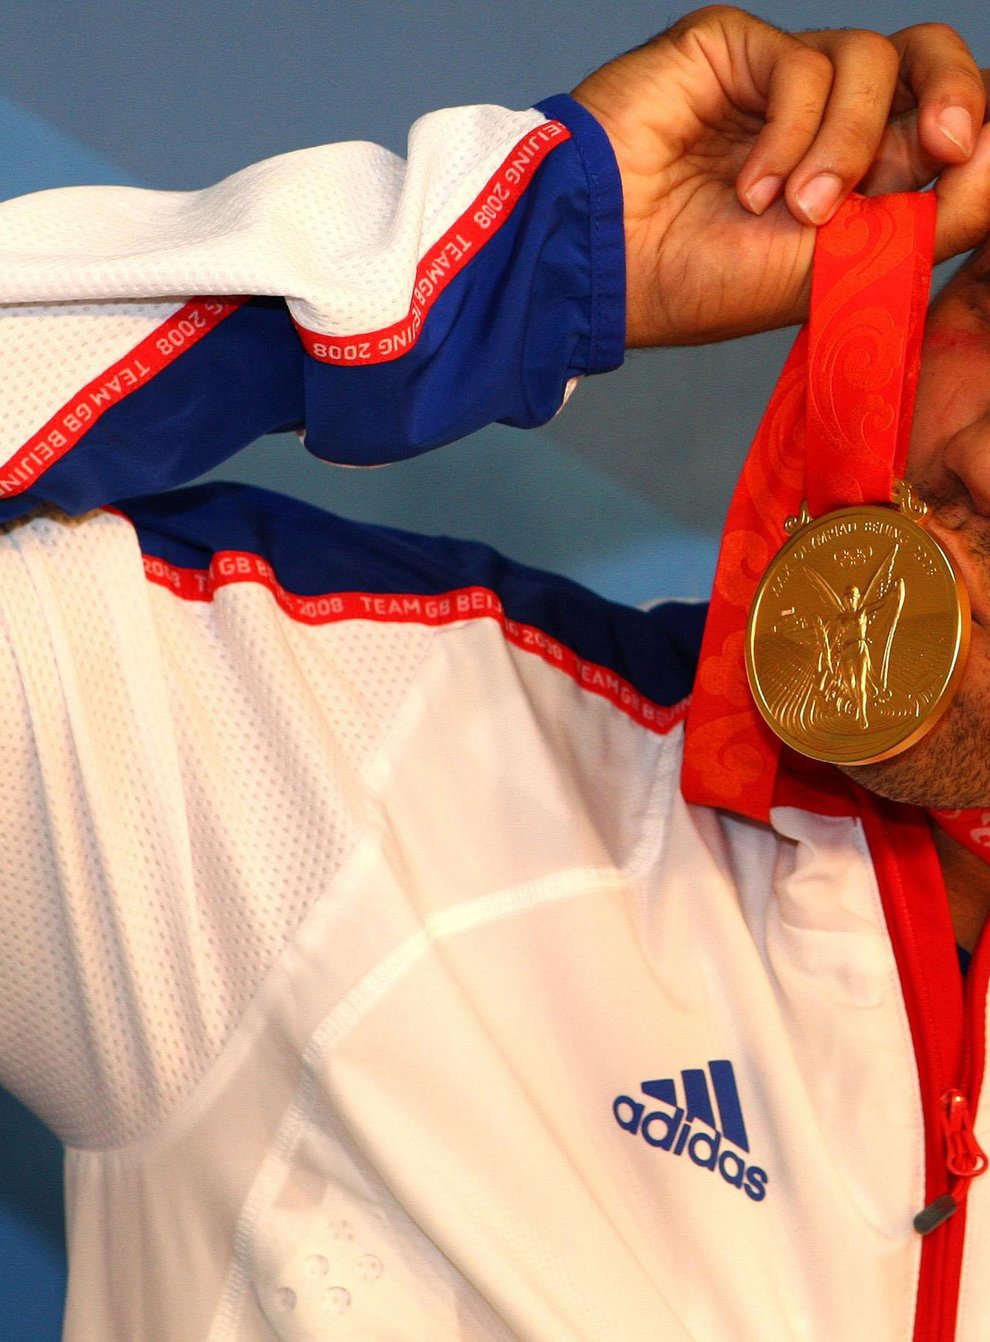 James DeGale won middleweight gold at the 2008 Olympic Games